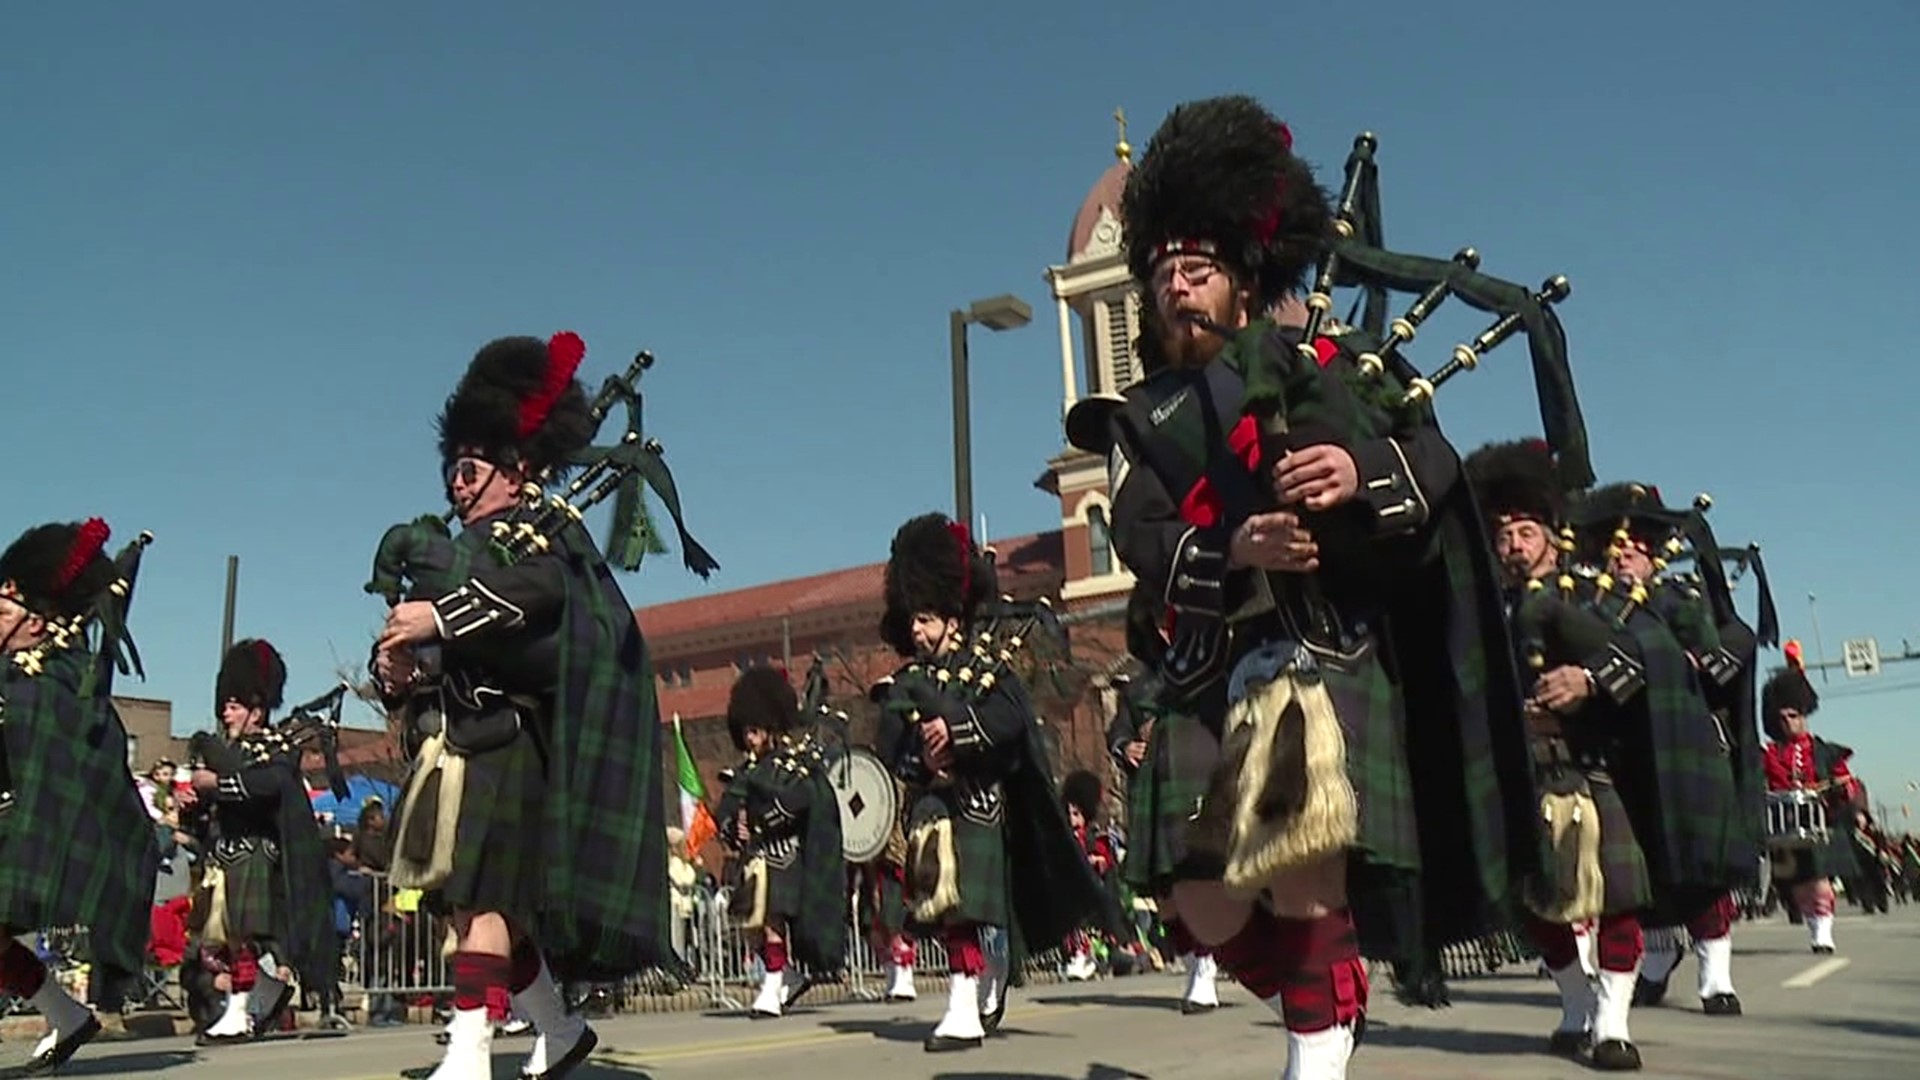 Mother nature is forcing a change of plans in Scranton this weekend. The Electric City's St. Patrick's parade scheduled for Saturday has now been postponed.